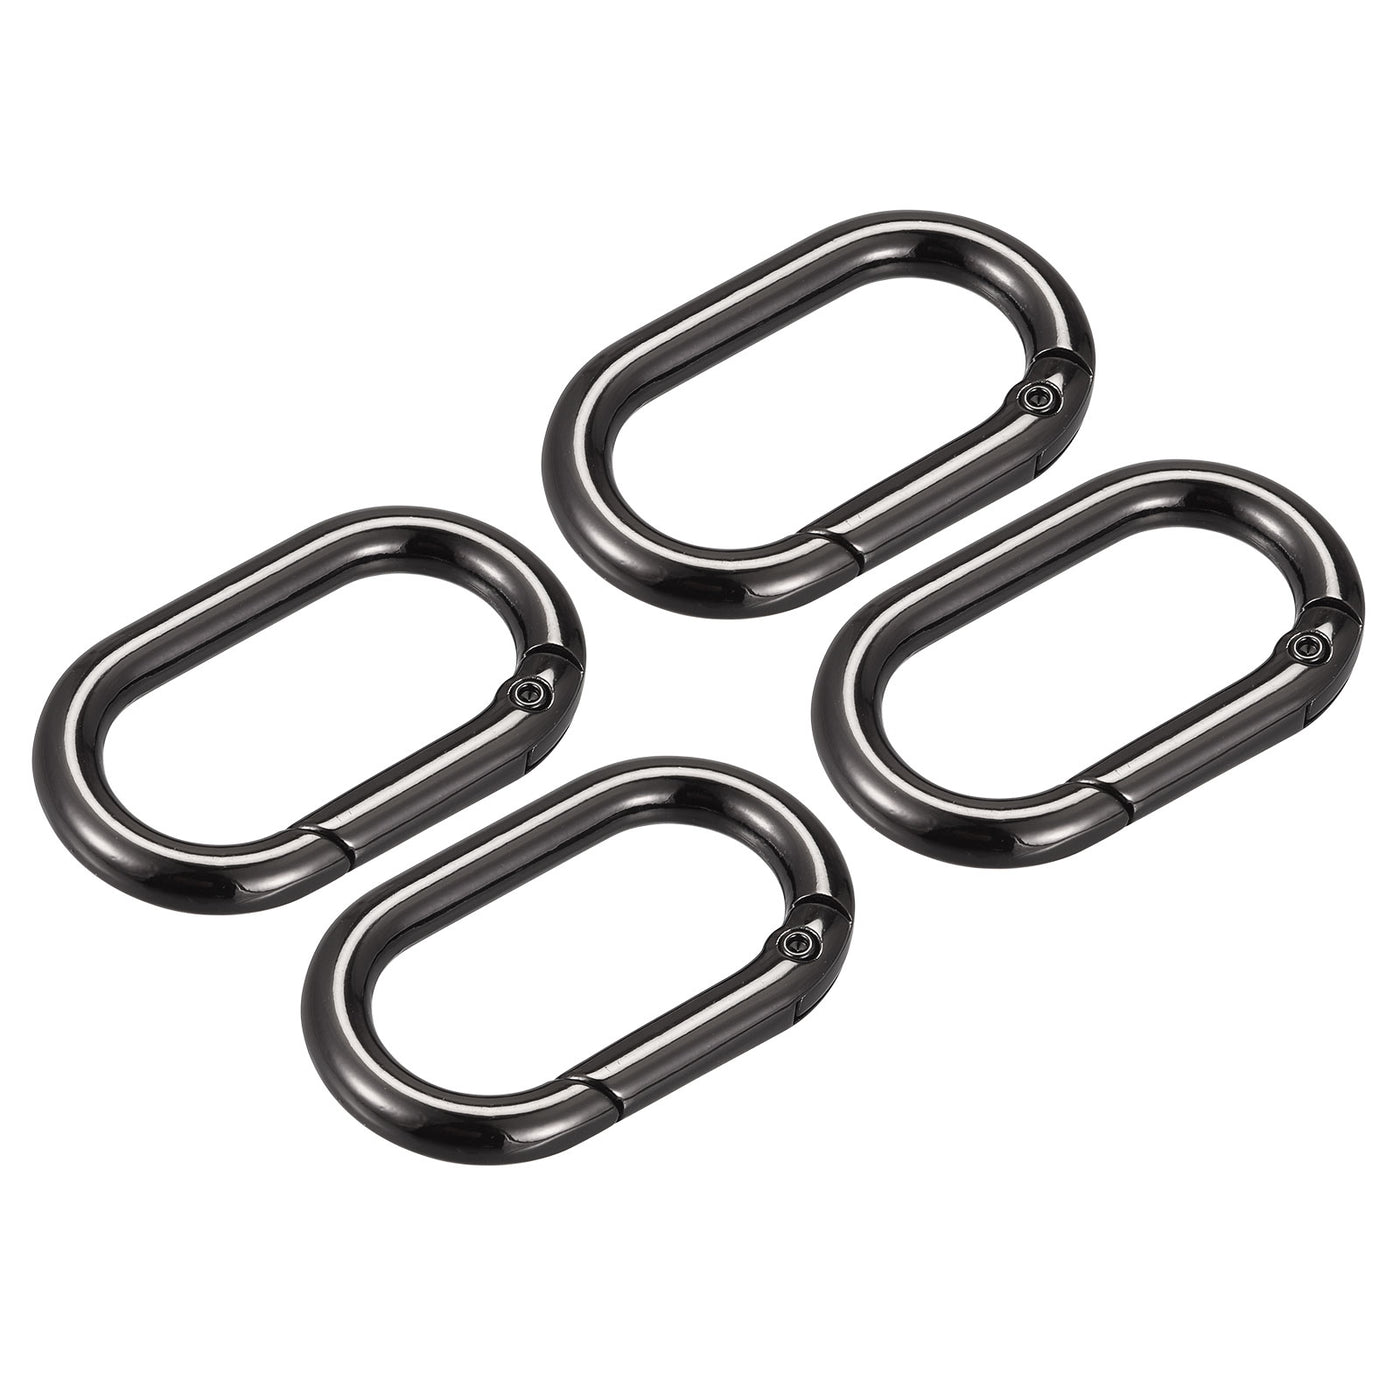 uxcell Uxcell 1.61" Spring Oval Ring Snap Clip Trigger for Bag Purse Keychain, 4Pcs Dark Grey